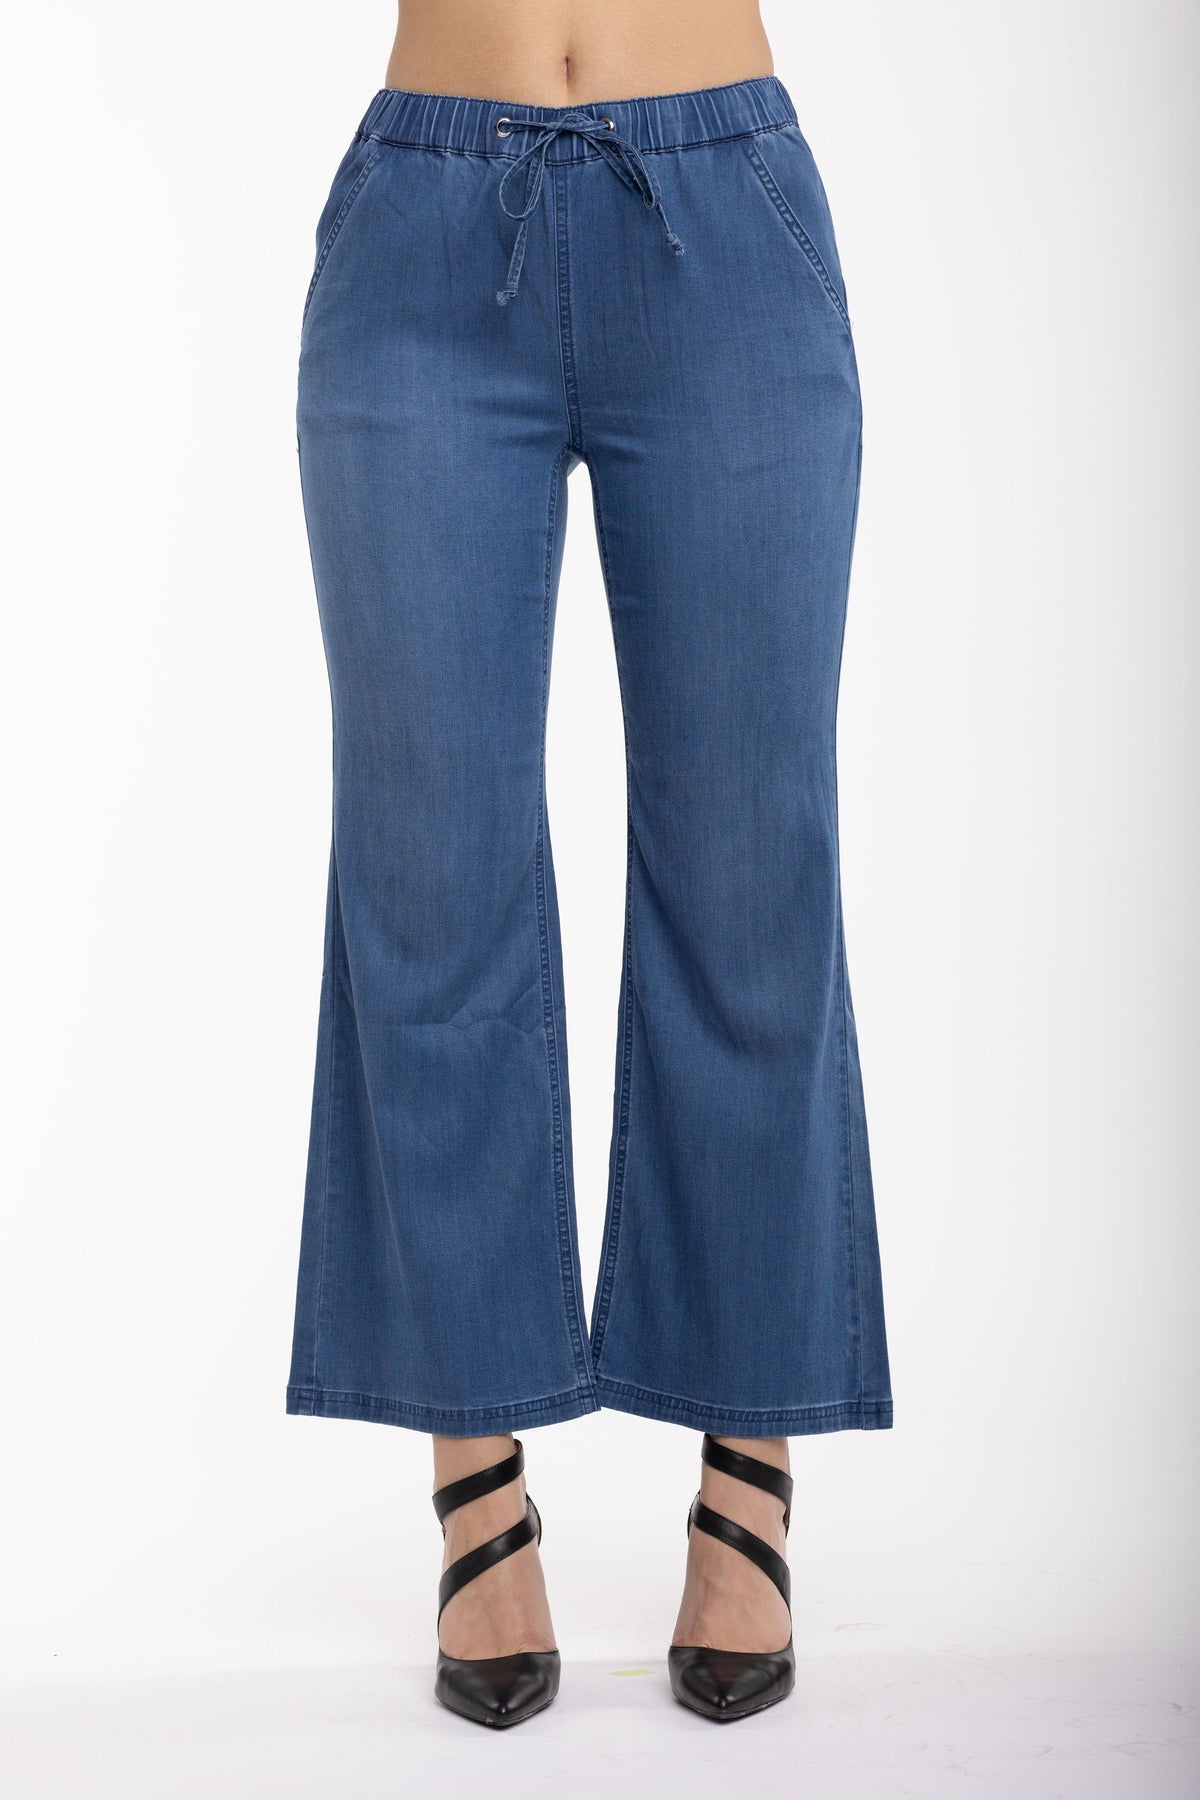 Carreli Jeans Wide Leg Tencel Pull-On Pant - Style T1003, front